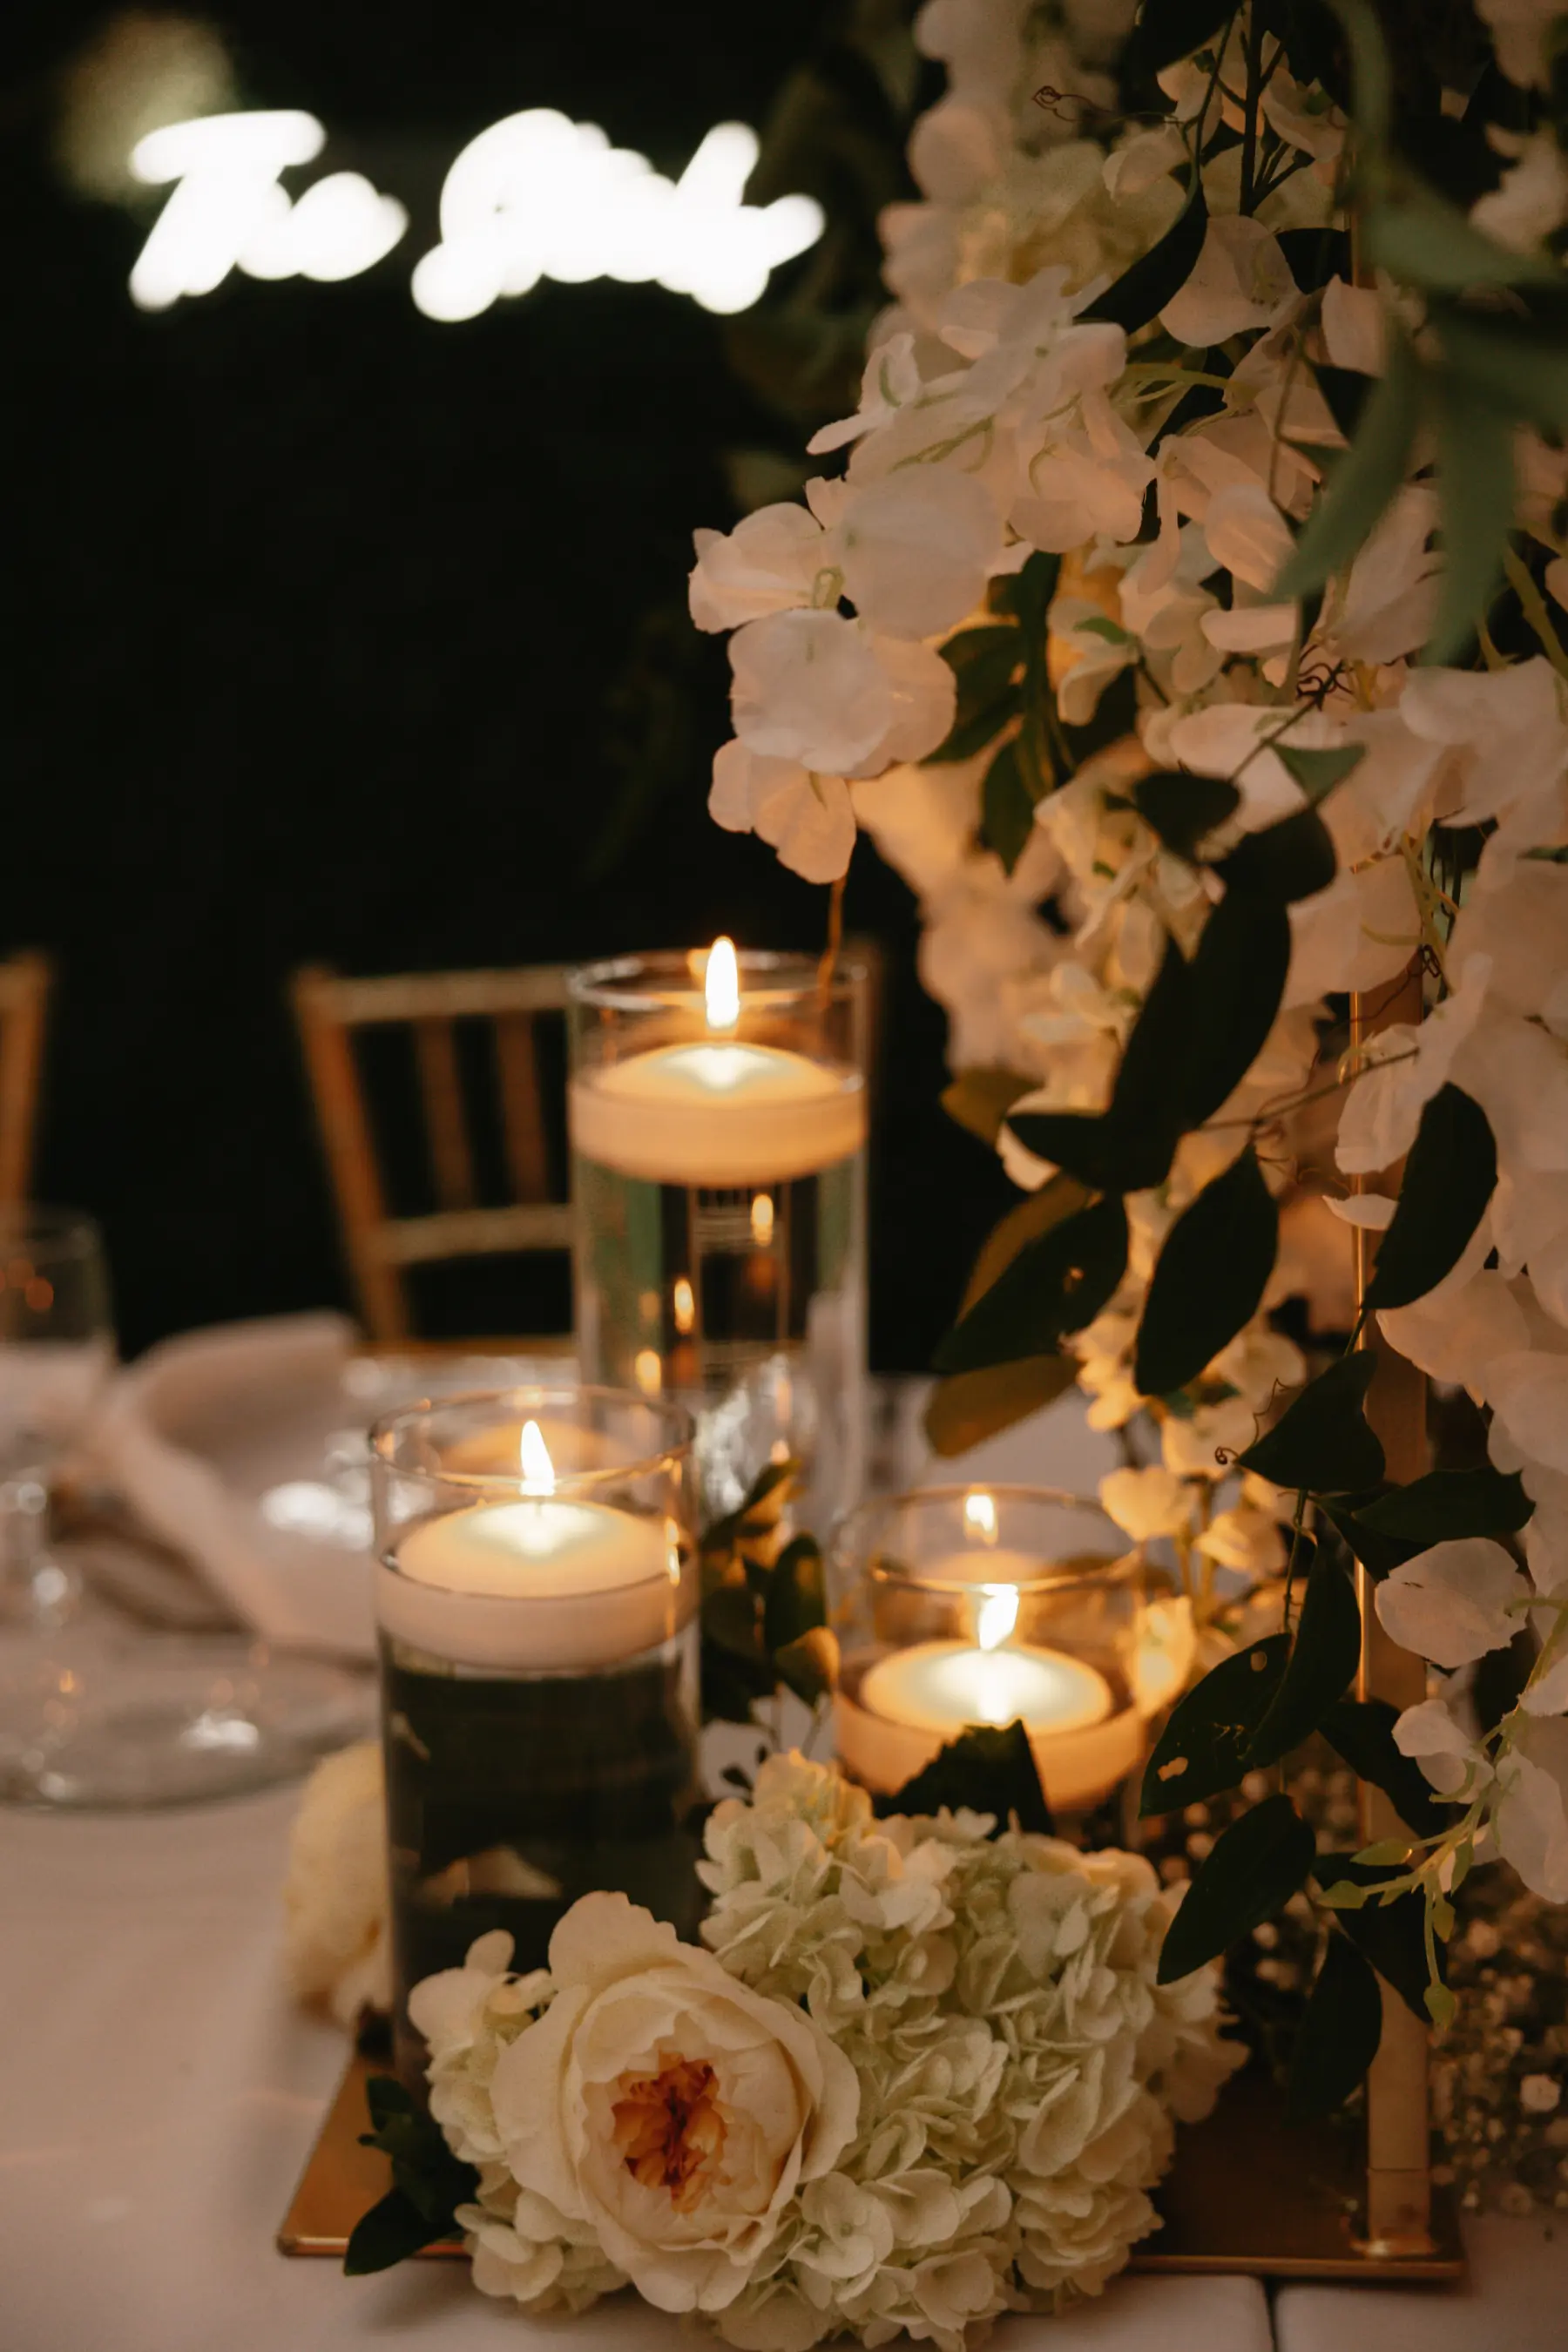 Classic White Orchid, Garden Rose, and Hydrangea, Floating Candle Centerpiece Decor Ideas | Tampa Bay Florist Beneva Florals